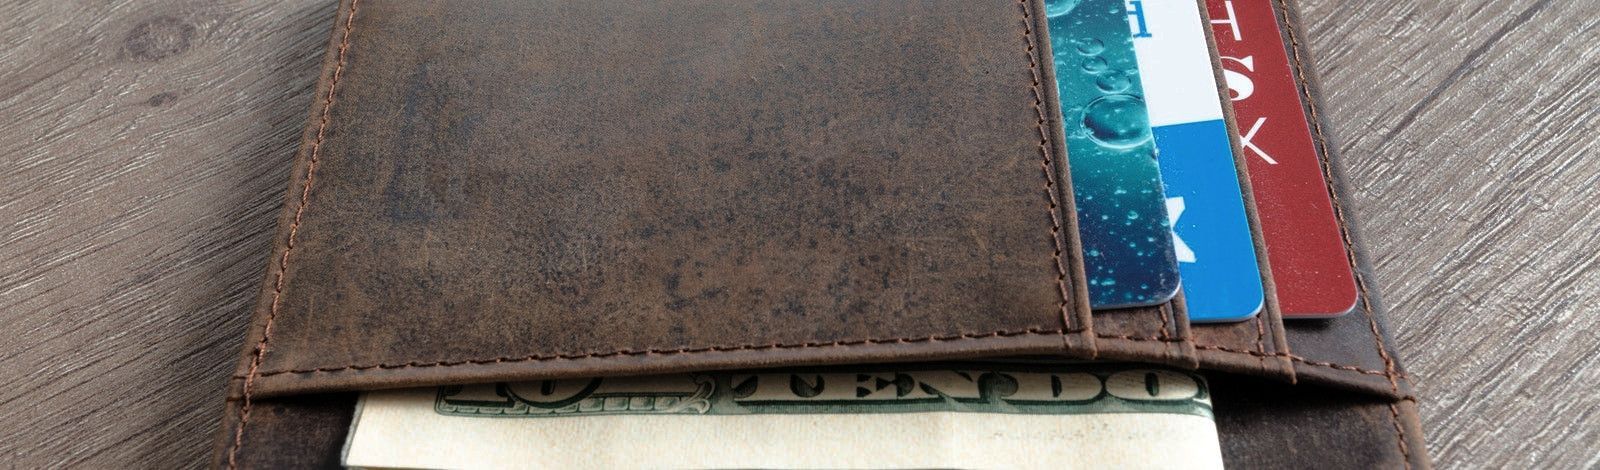 Closeup photo of a brown leather wallet with three credit cards and a ten dollar bill showing. The credit cards stick out of slots on the right side of the wallet; they are teal, blue and white, and red and white. The edge of the ten dollar bill sticks ou